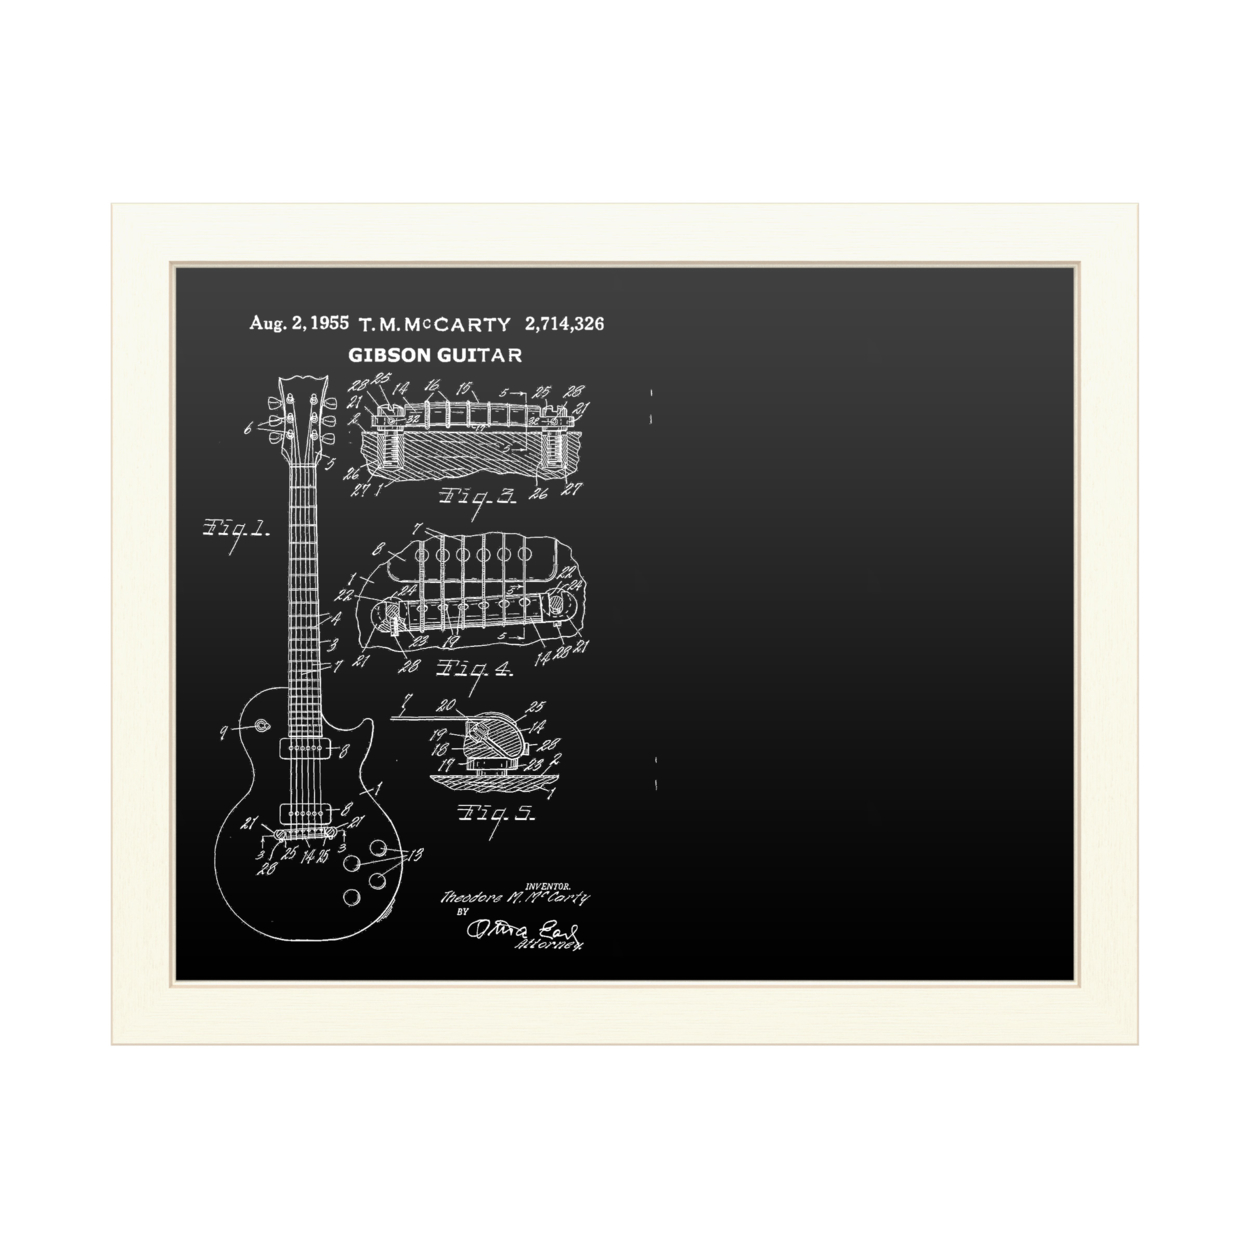 16 X 20 Chalk Board With Printed Artwork - Claire Doherty 1955 Mccarty Gibson Guitar Patent Black White Board - Ready To Hang Chalkboard